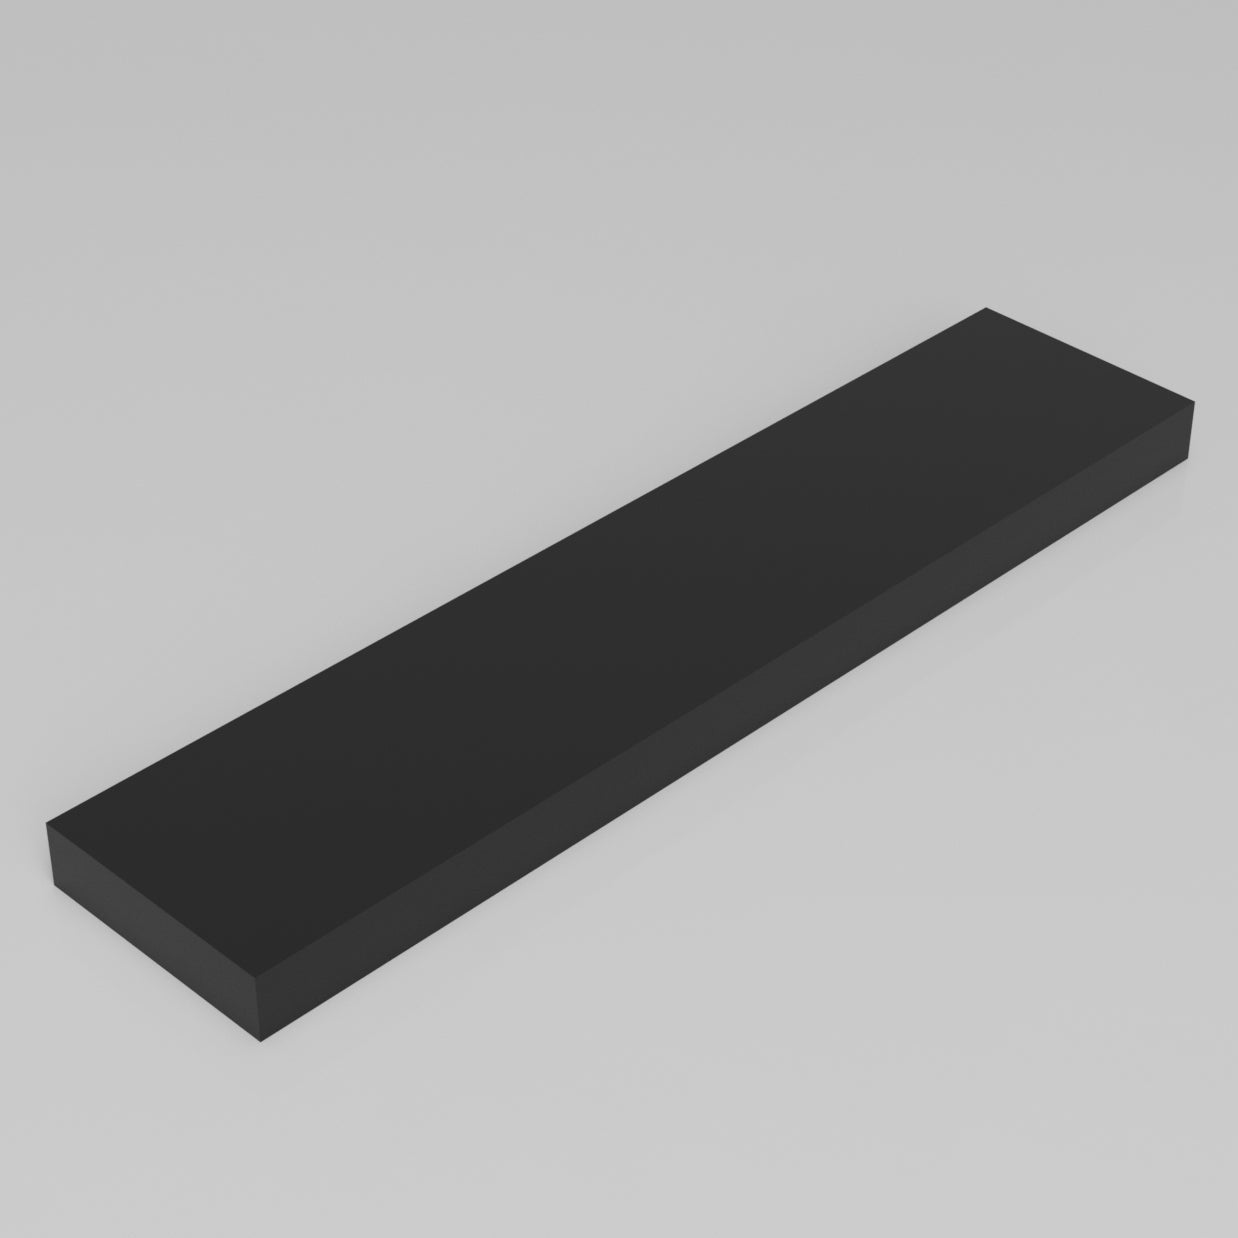 Machinable Wax Rectangular Block Front View 1 Inch by 4 Inch by 18 Inch